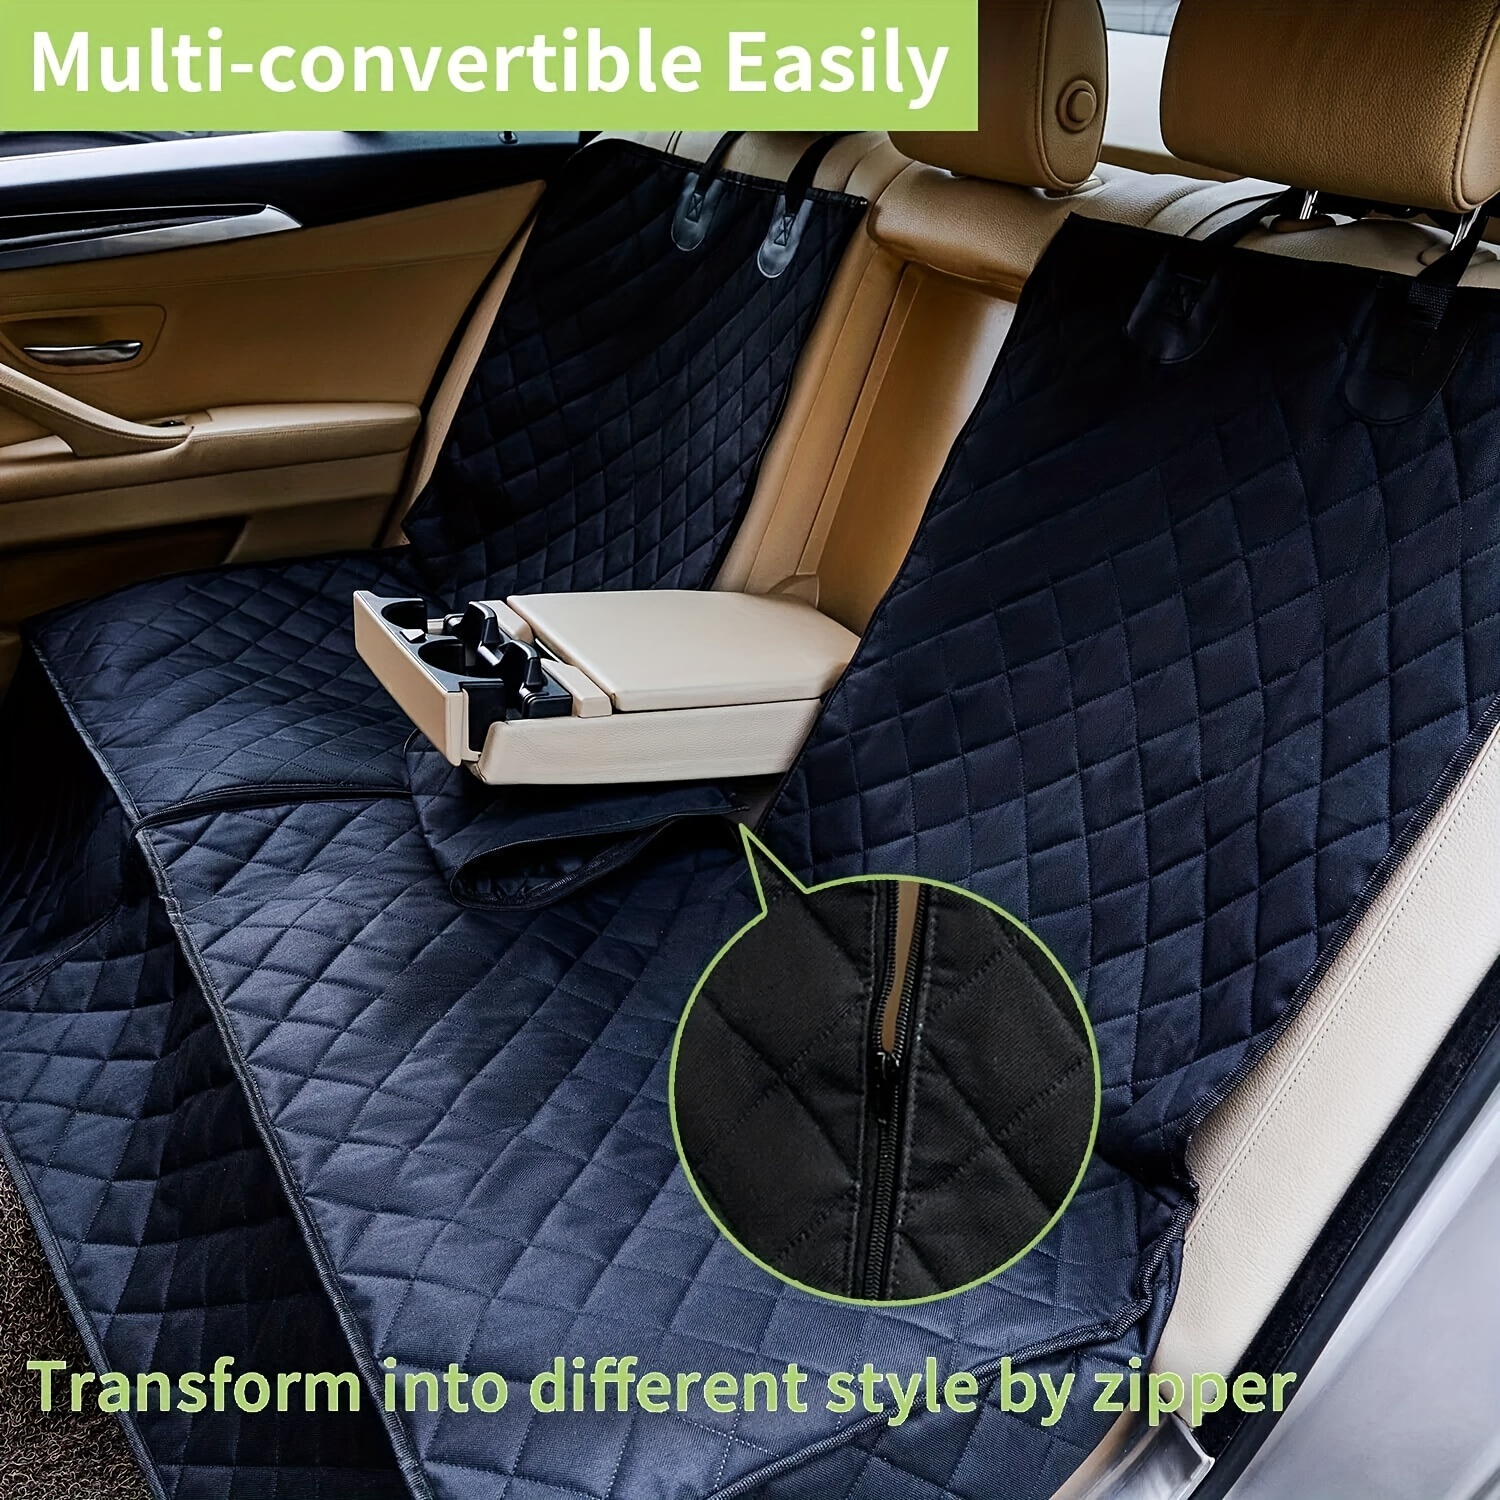 Oxford Dog Car Seat Cover Waterproof Bench Backing Car Cover for